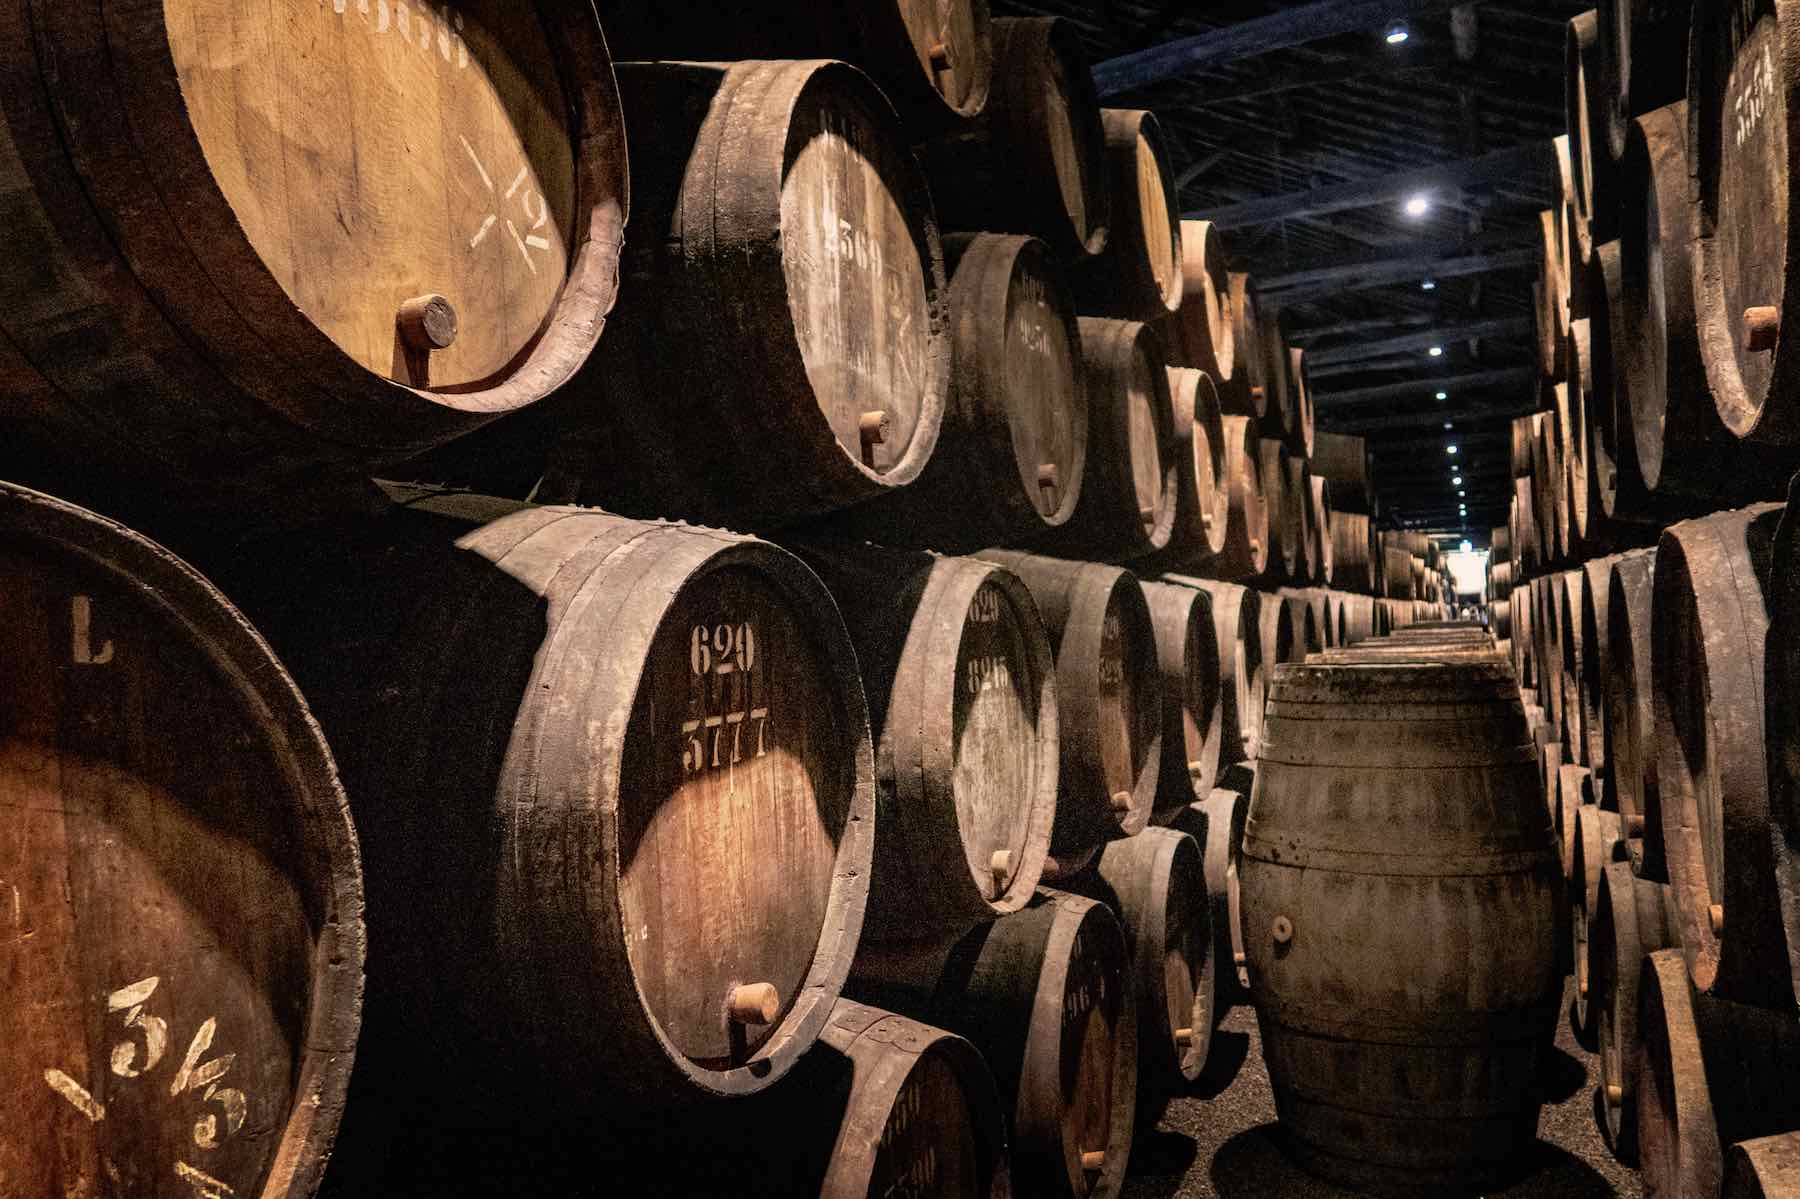 Types of port cask used to make whisky, and their effect on flavour